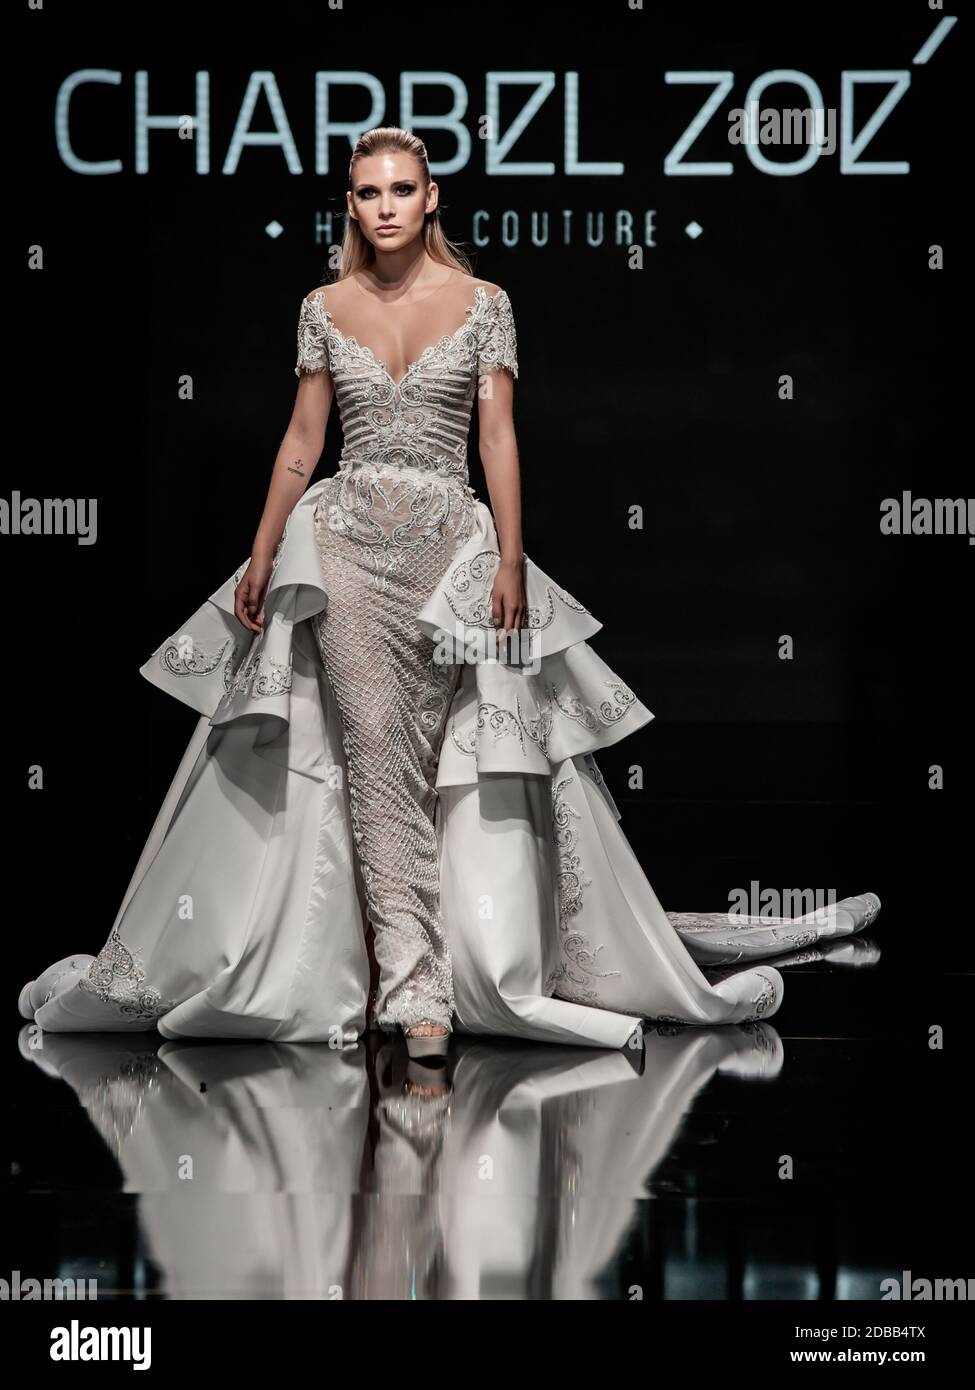 A model walks the runway for Charbel Zoe at Los Angeles Fashion Week S ...